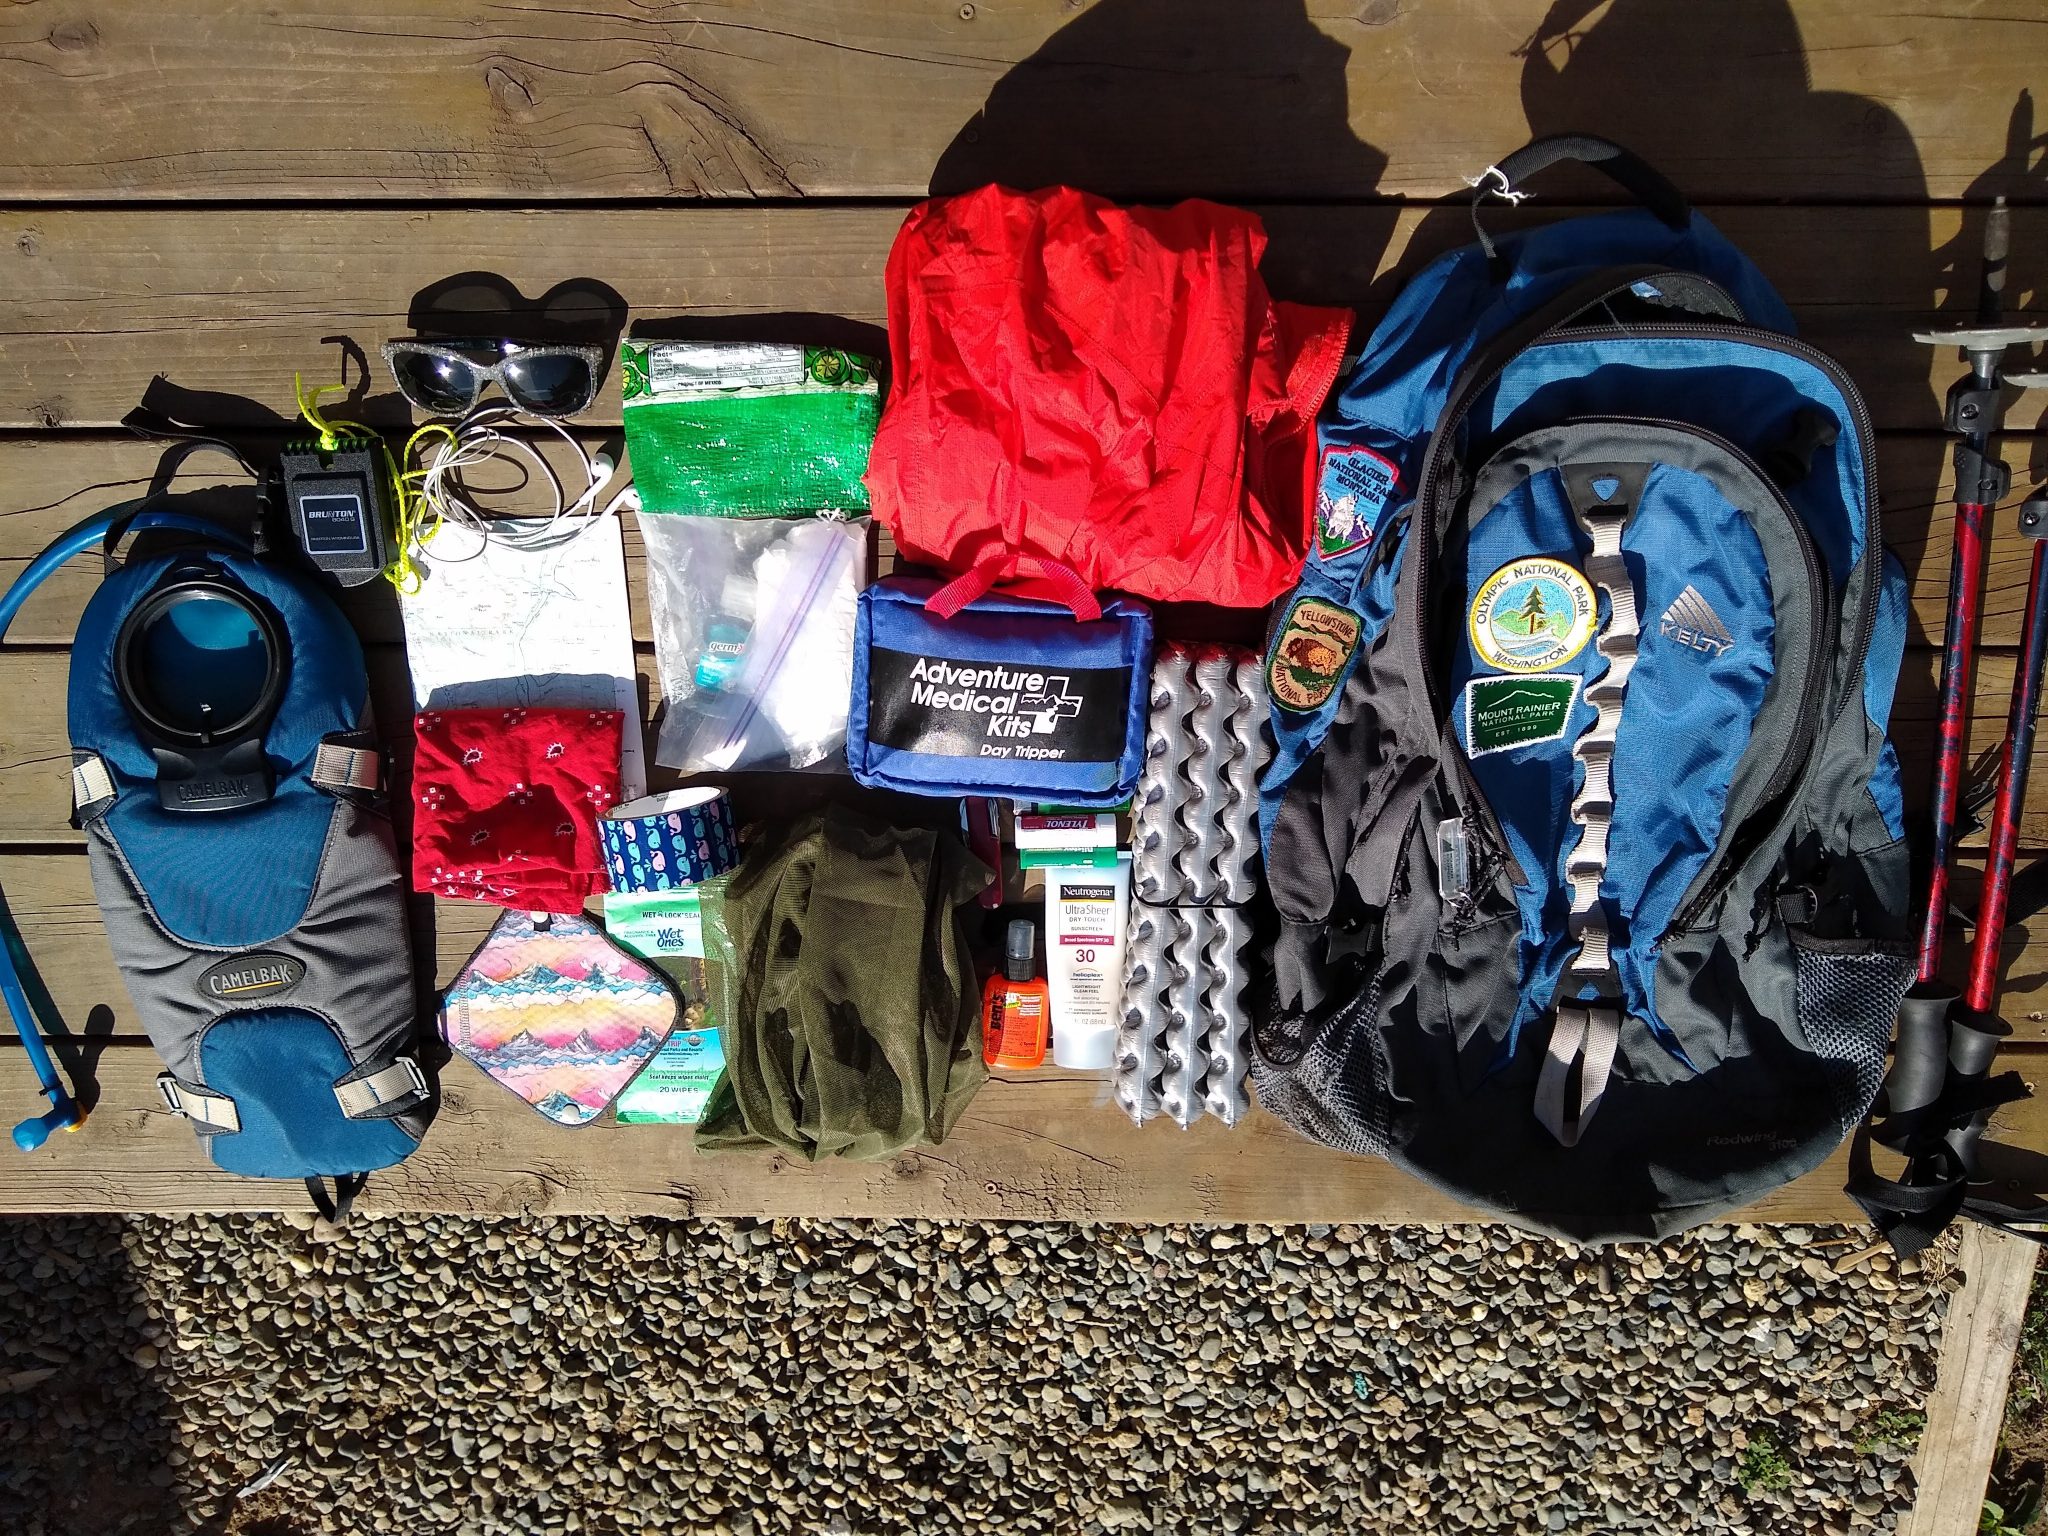 What I pack for a hike: A blue backpack and lots of day hiking gear, including trekking poles, a red rainjacket, a first aid kit, a sit pad, head net, water bladder, sunglases and a map